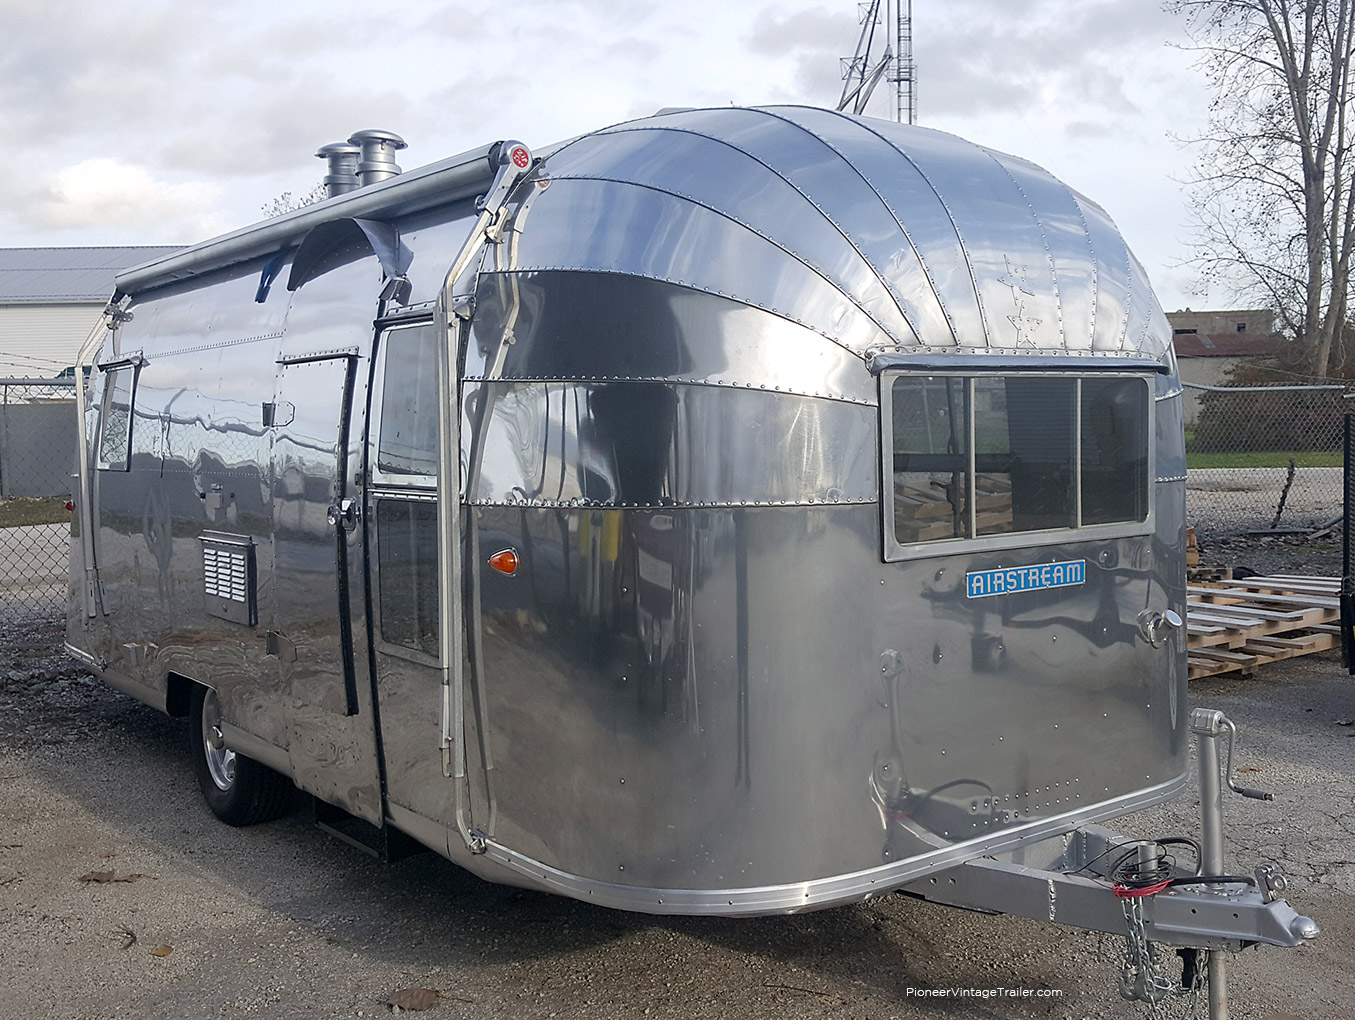 1957 Airstream Caravanner restored with new front panels